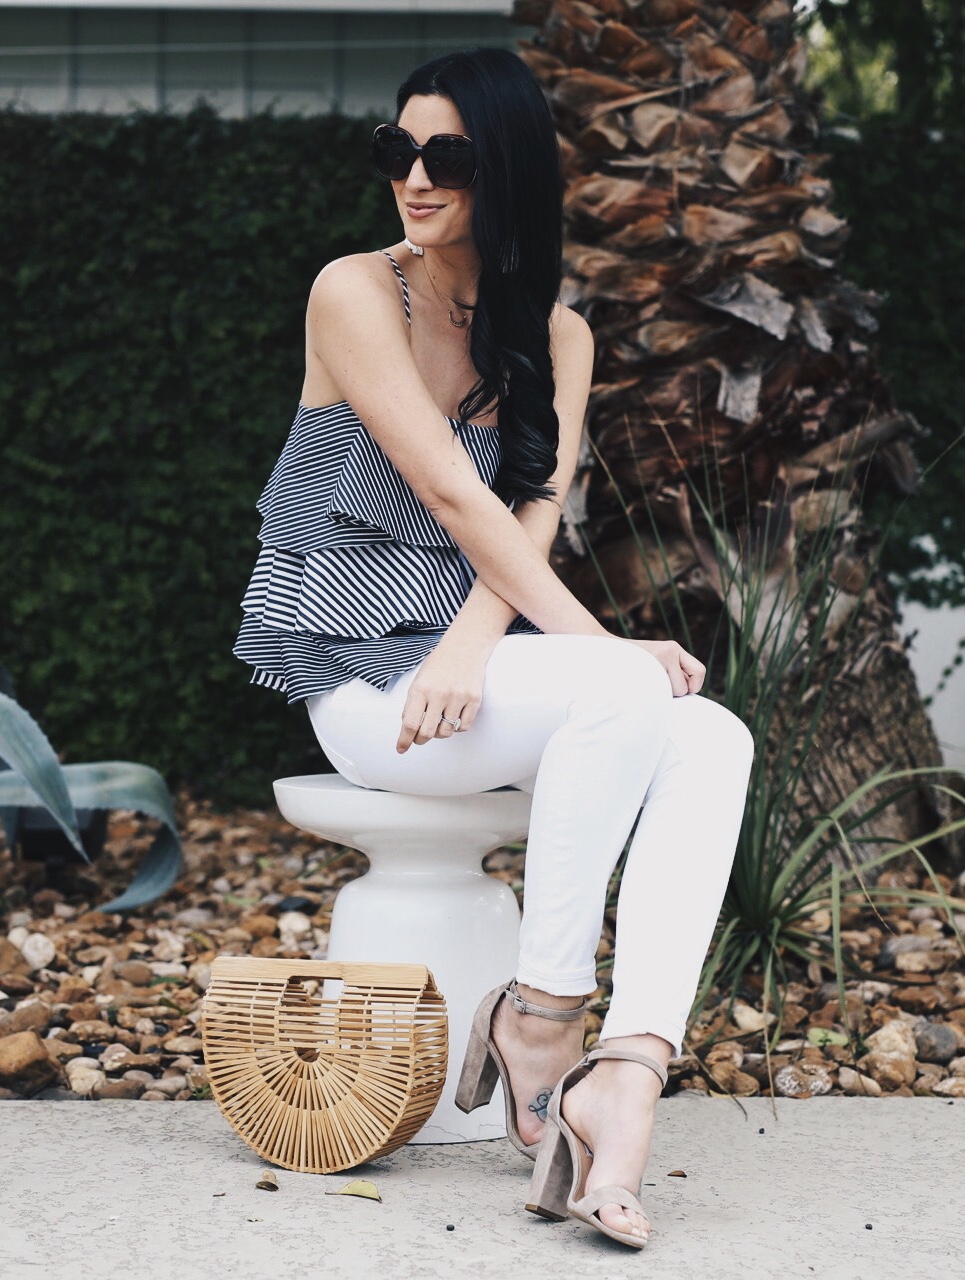 how to find the best pair of white denim | summer outfit ideas | white denim | what to pack for summer vacation | summer style ideas || Dressed to Kill #whitedenim #summeroutfit #packingtips - Finding the Perfect Pair of White Denim by popular Austin fashion blogger Dressed to Kill